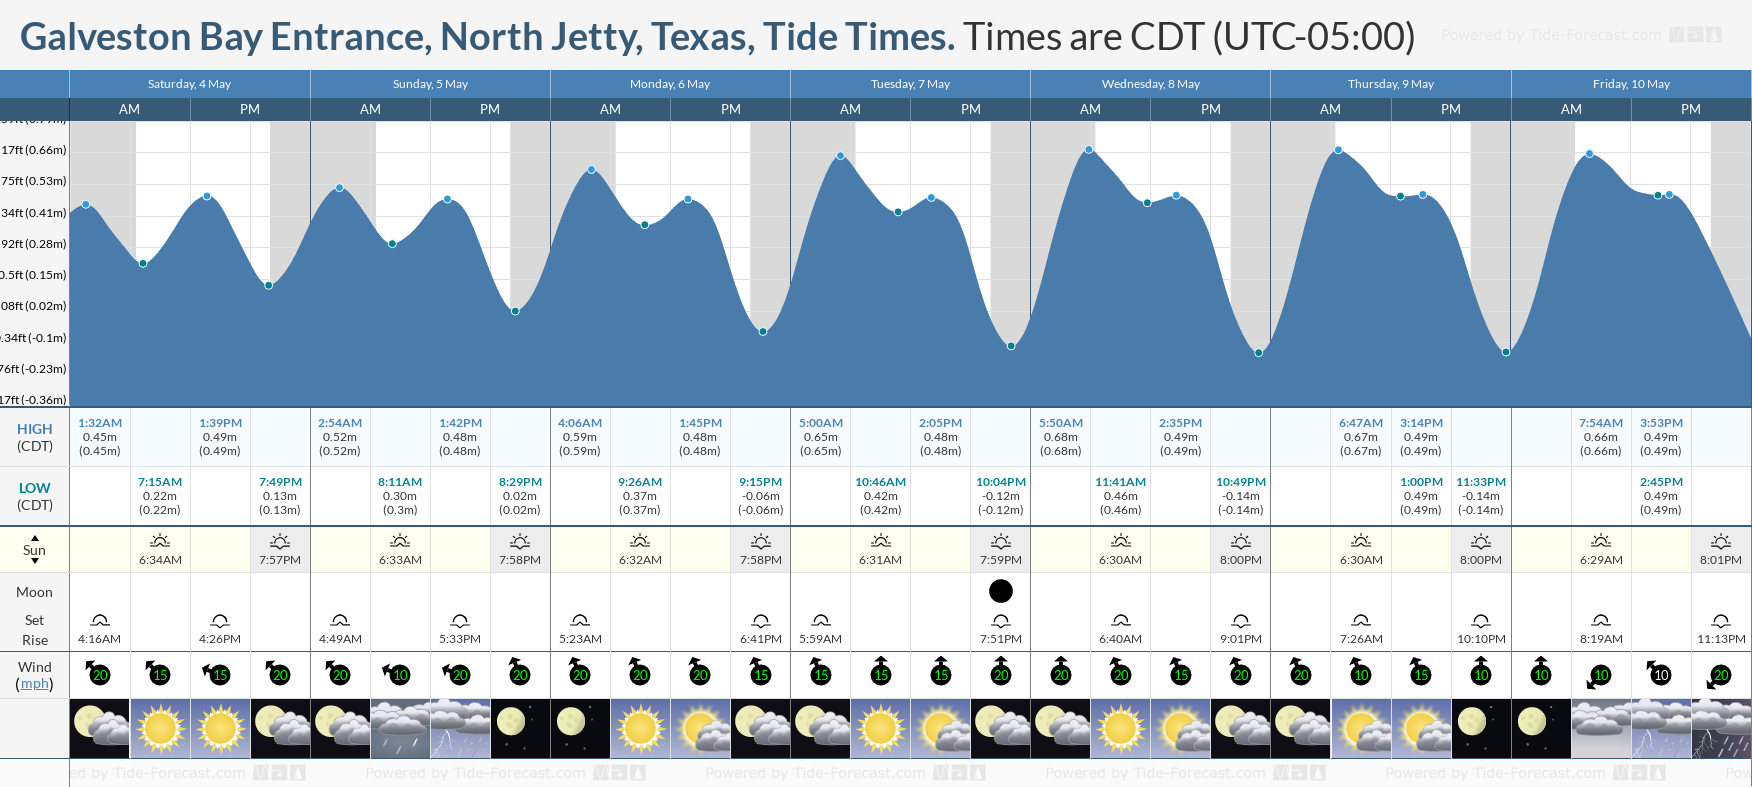 Galveston Bay Entrance, North Jetty, Texas Tide Chart including high and low tide tide times for the next 7 days